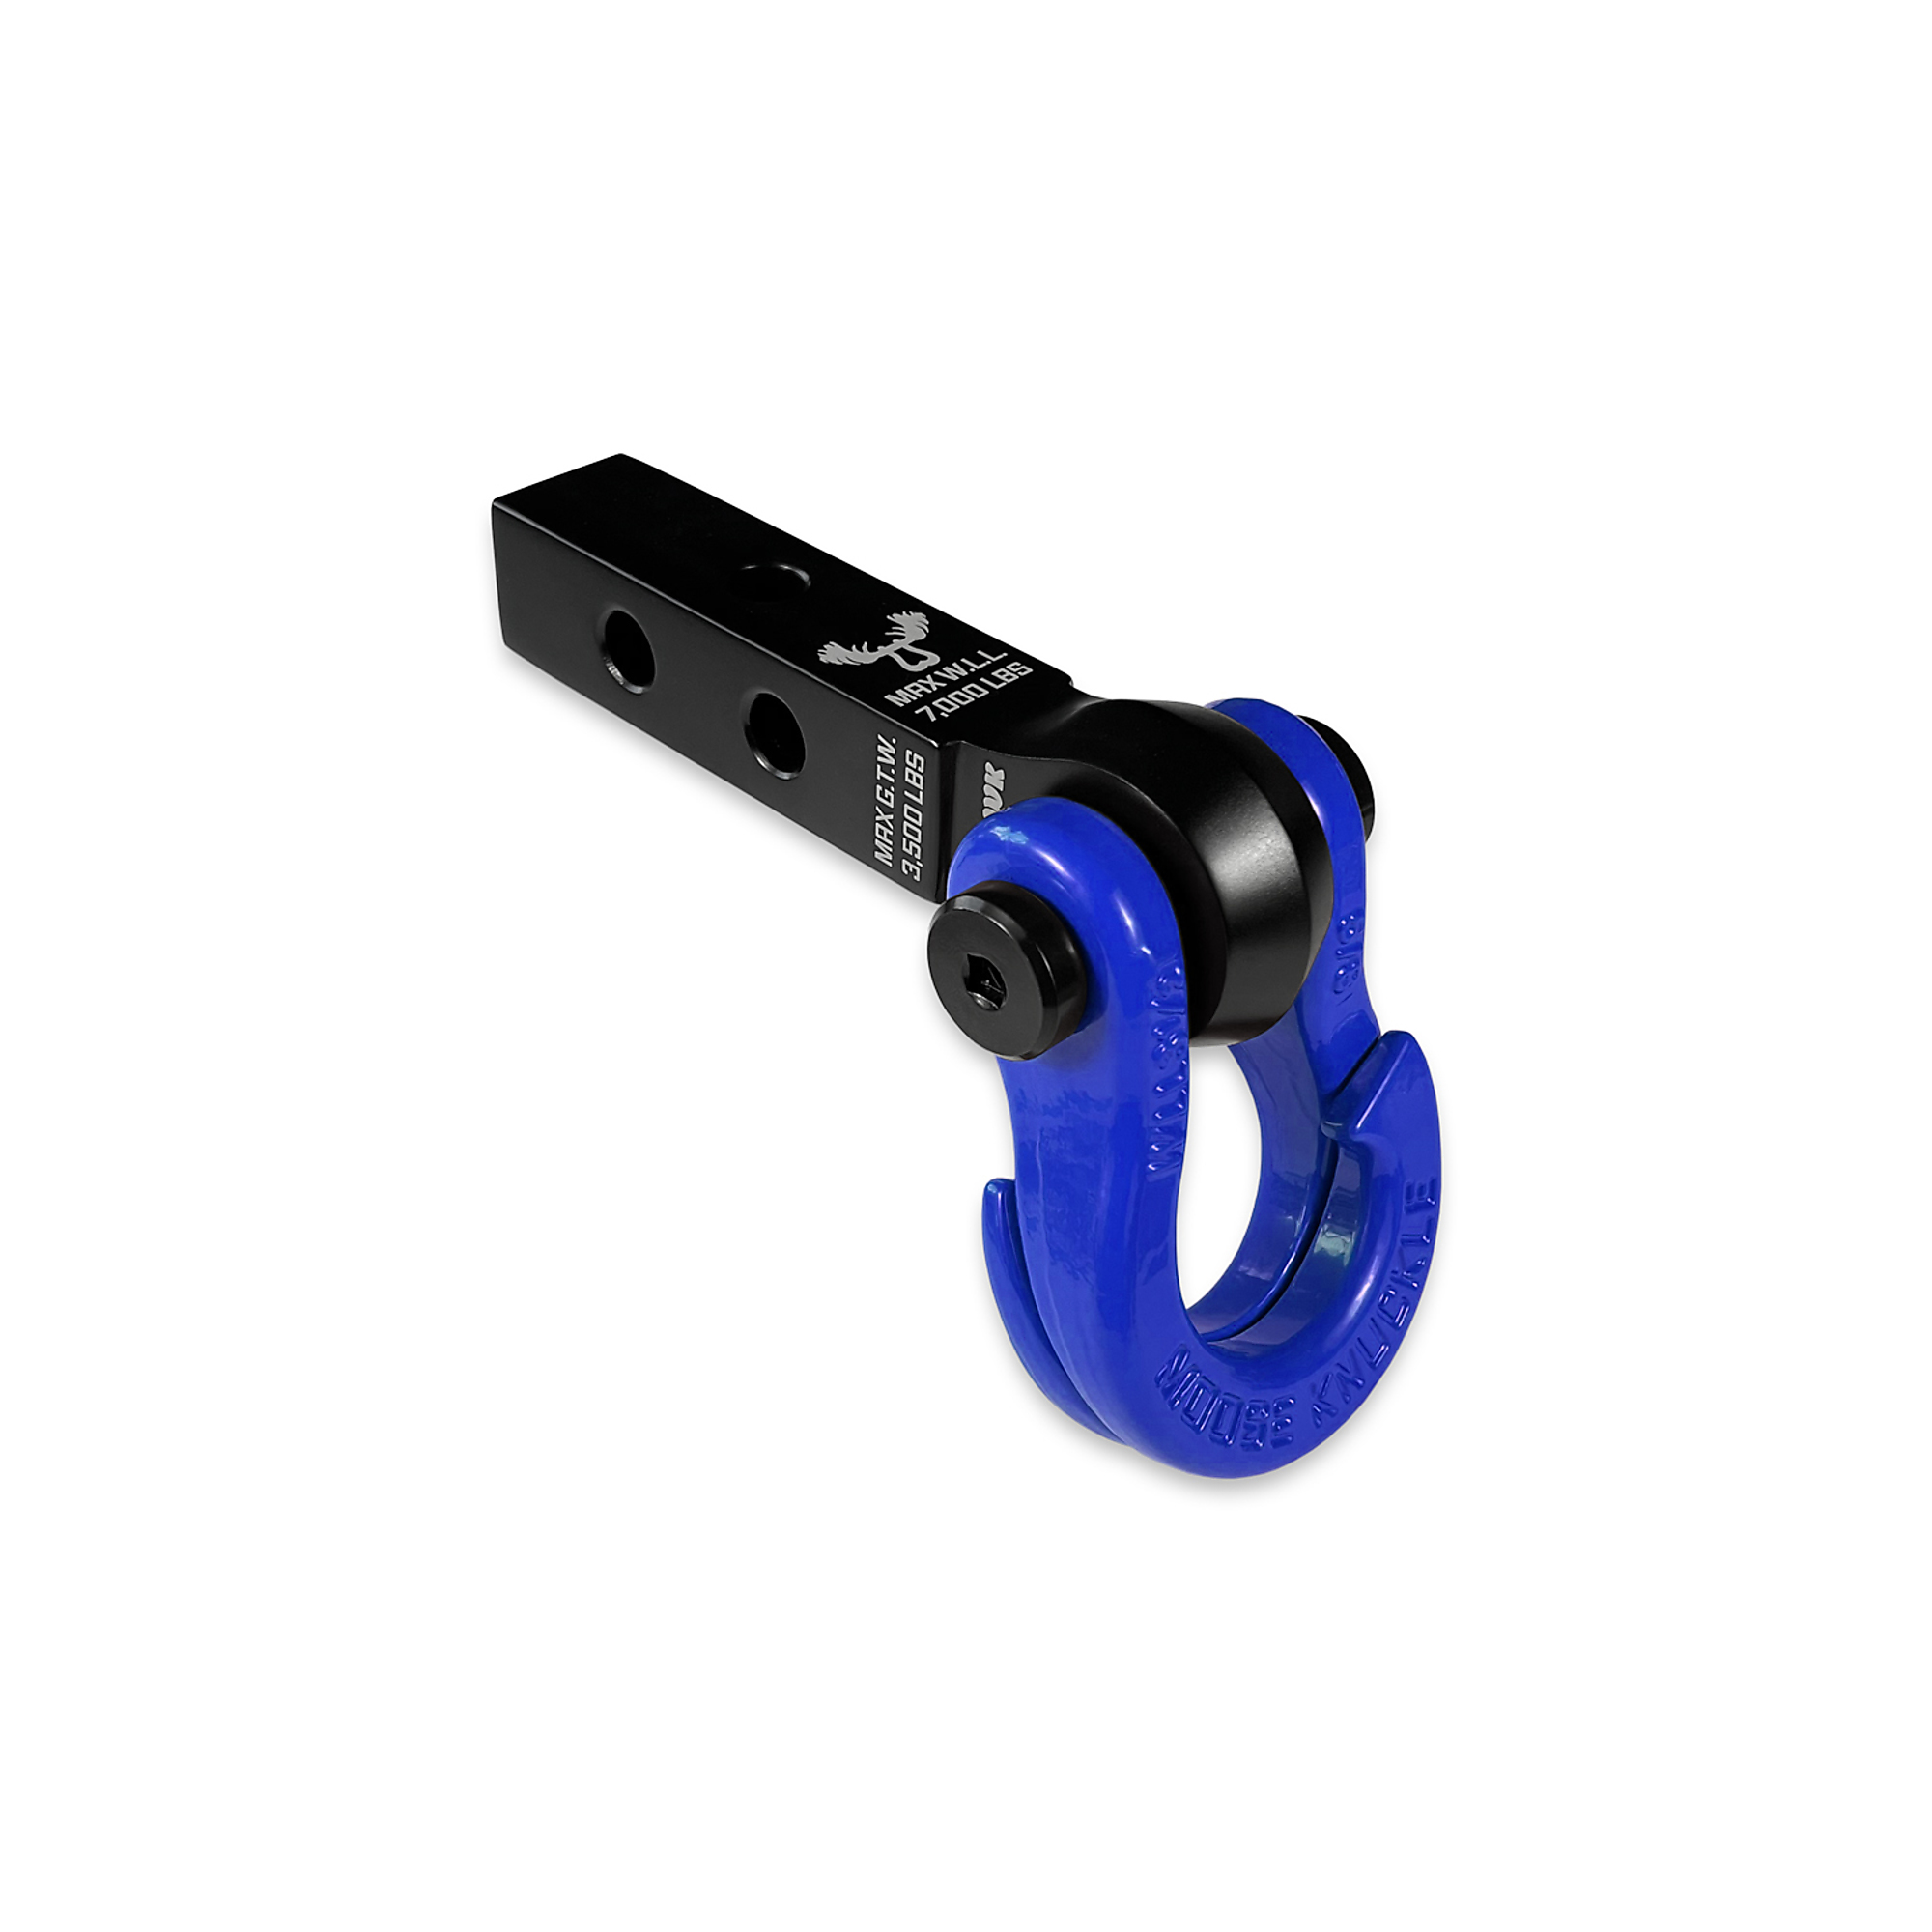 Moose Knuckle Offroad, 5/8 Jowl Split Shackle and Mohawk 1.25 Receiver Combo, Gross Towing Weight 3500 lb, Class Rating Class II, Model FN000042-002